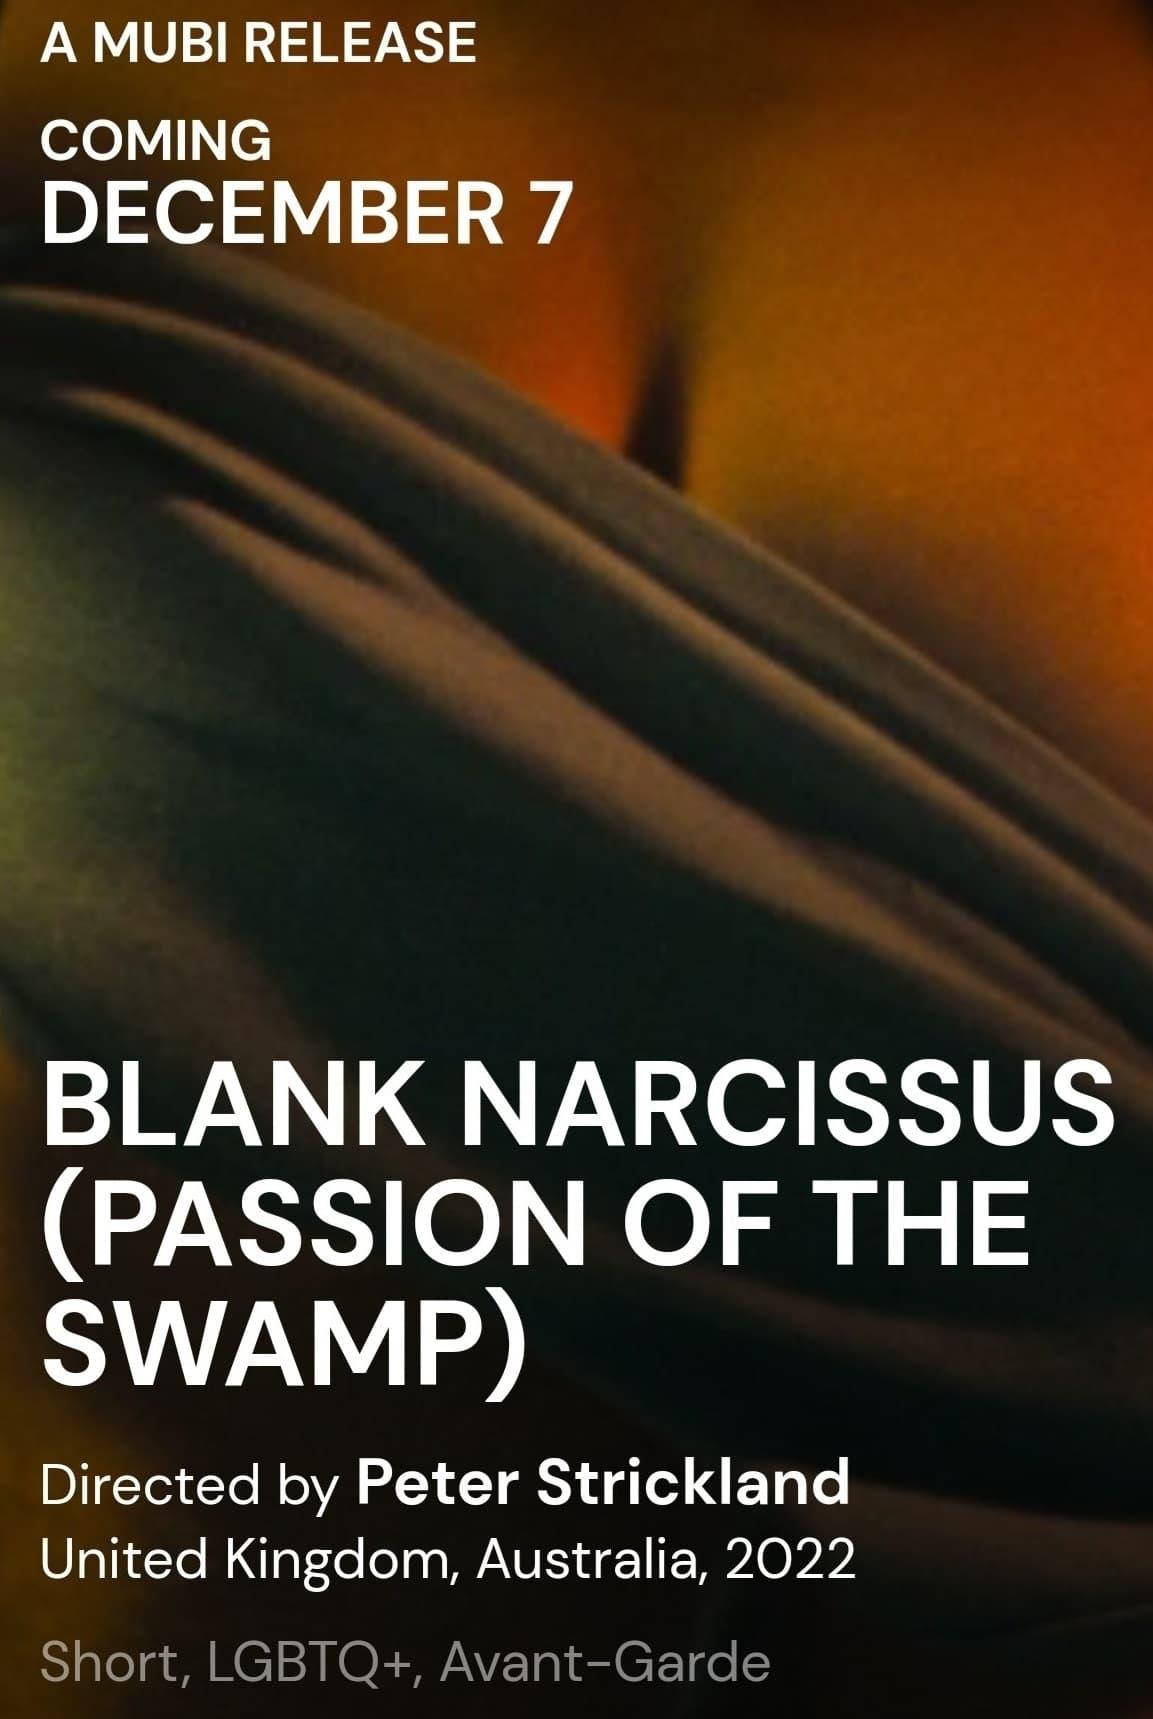 Blank Narcissus (Passion of the Swamp) poster